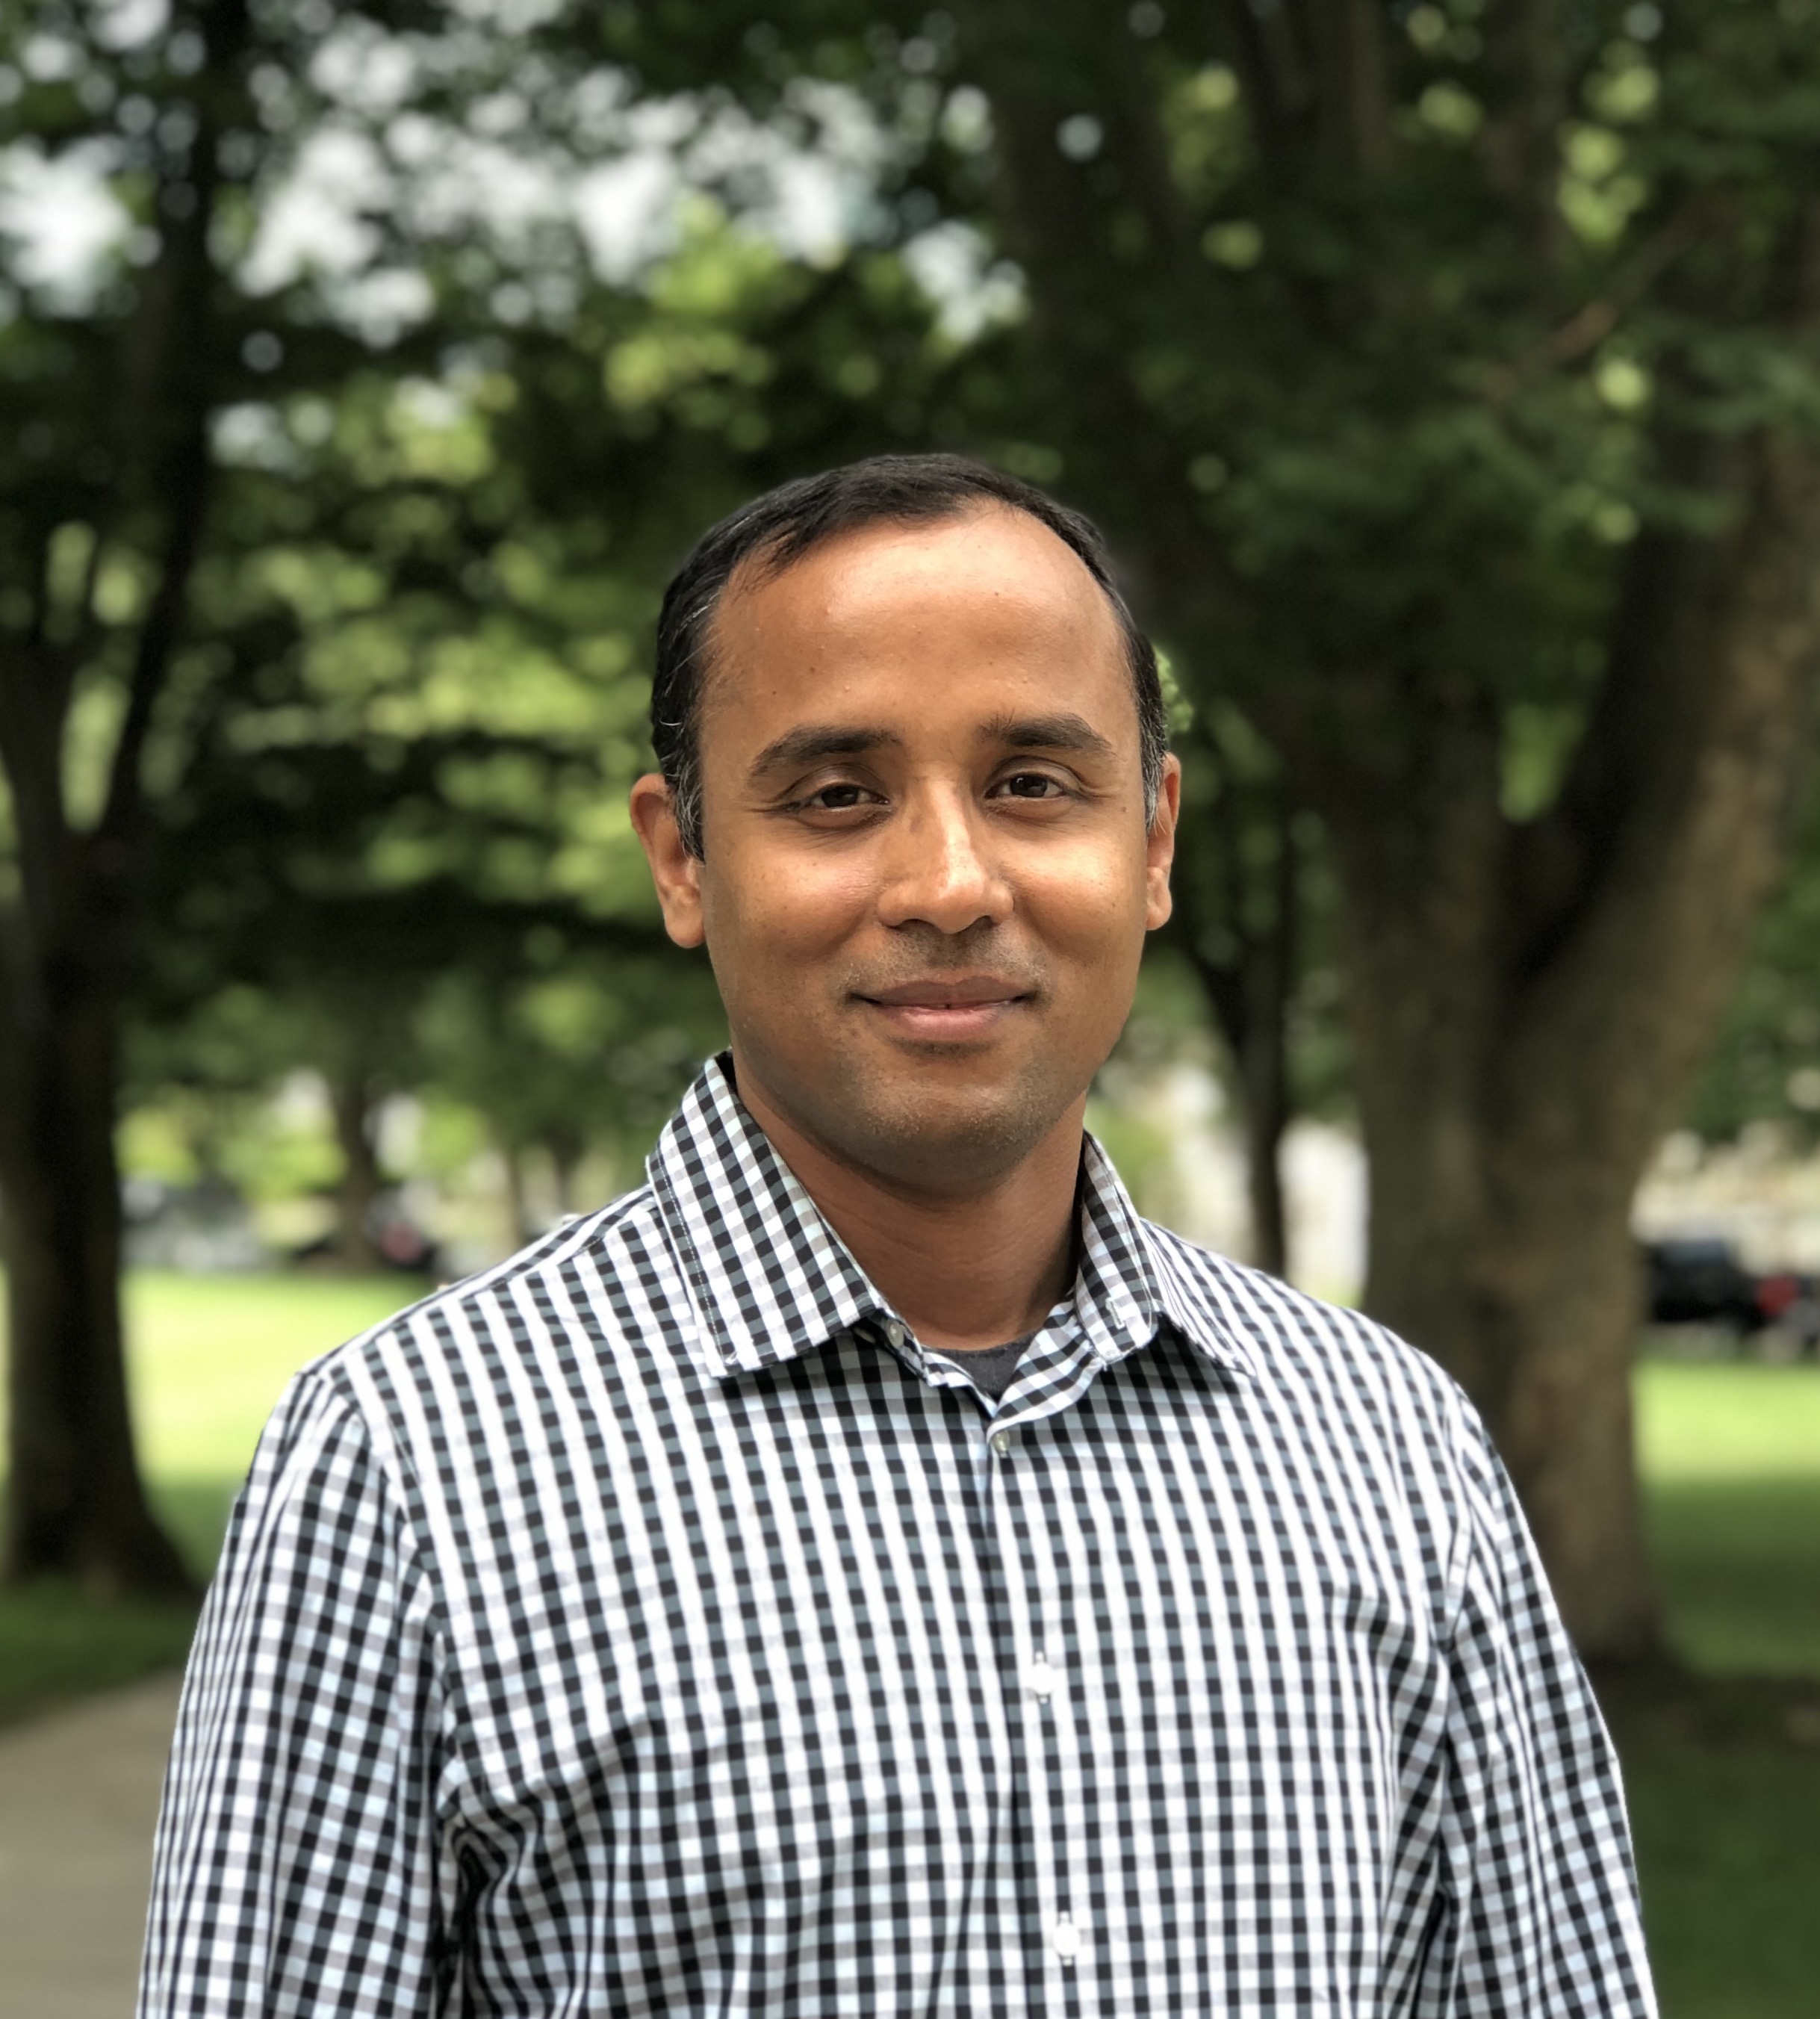 Picture of Krishna Venkatasubramanian in a check button-down shirt. URI quad in the background.